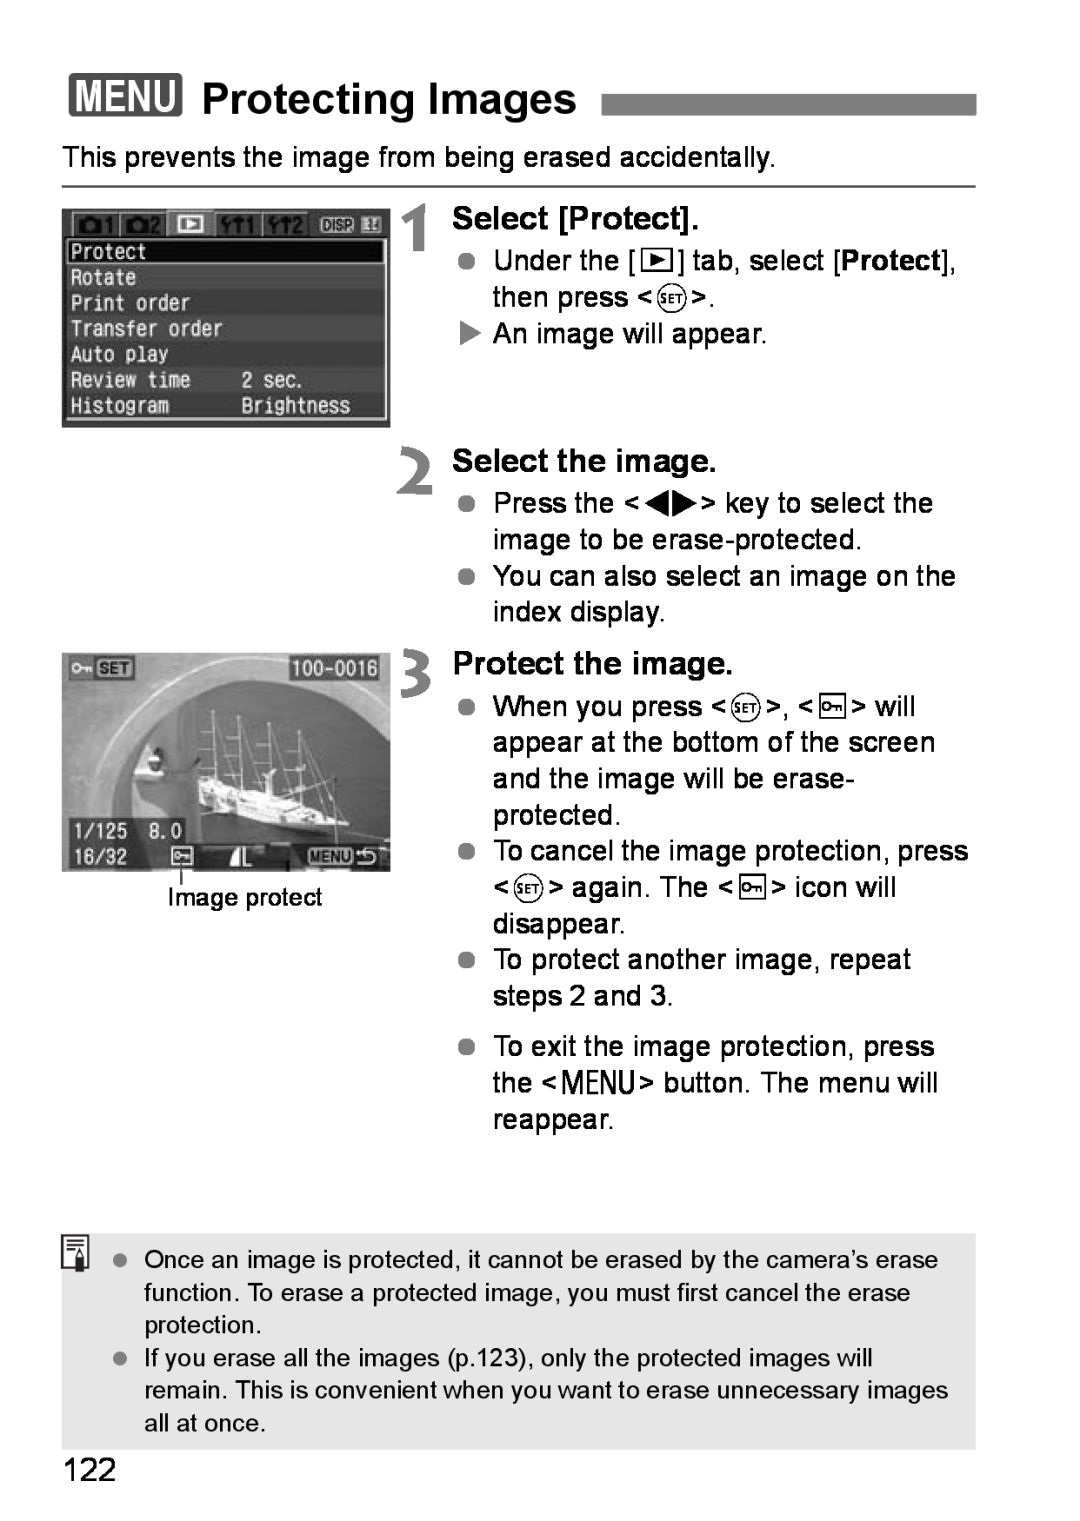 Canon EOS DIGITAL REBEL XTI instruction manual 3Protecting Images, Select Protect, Protect the image, Select the image 